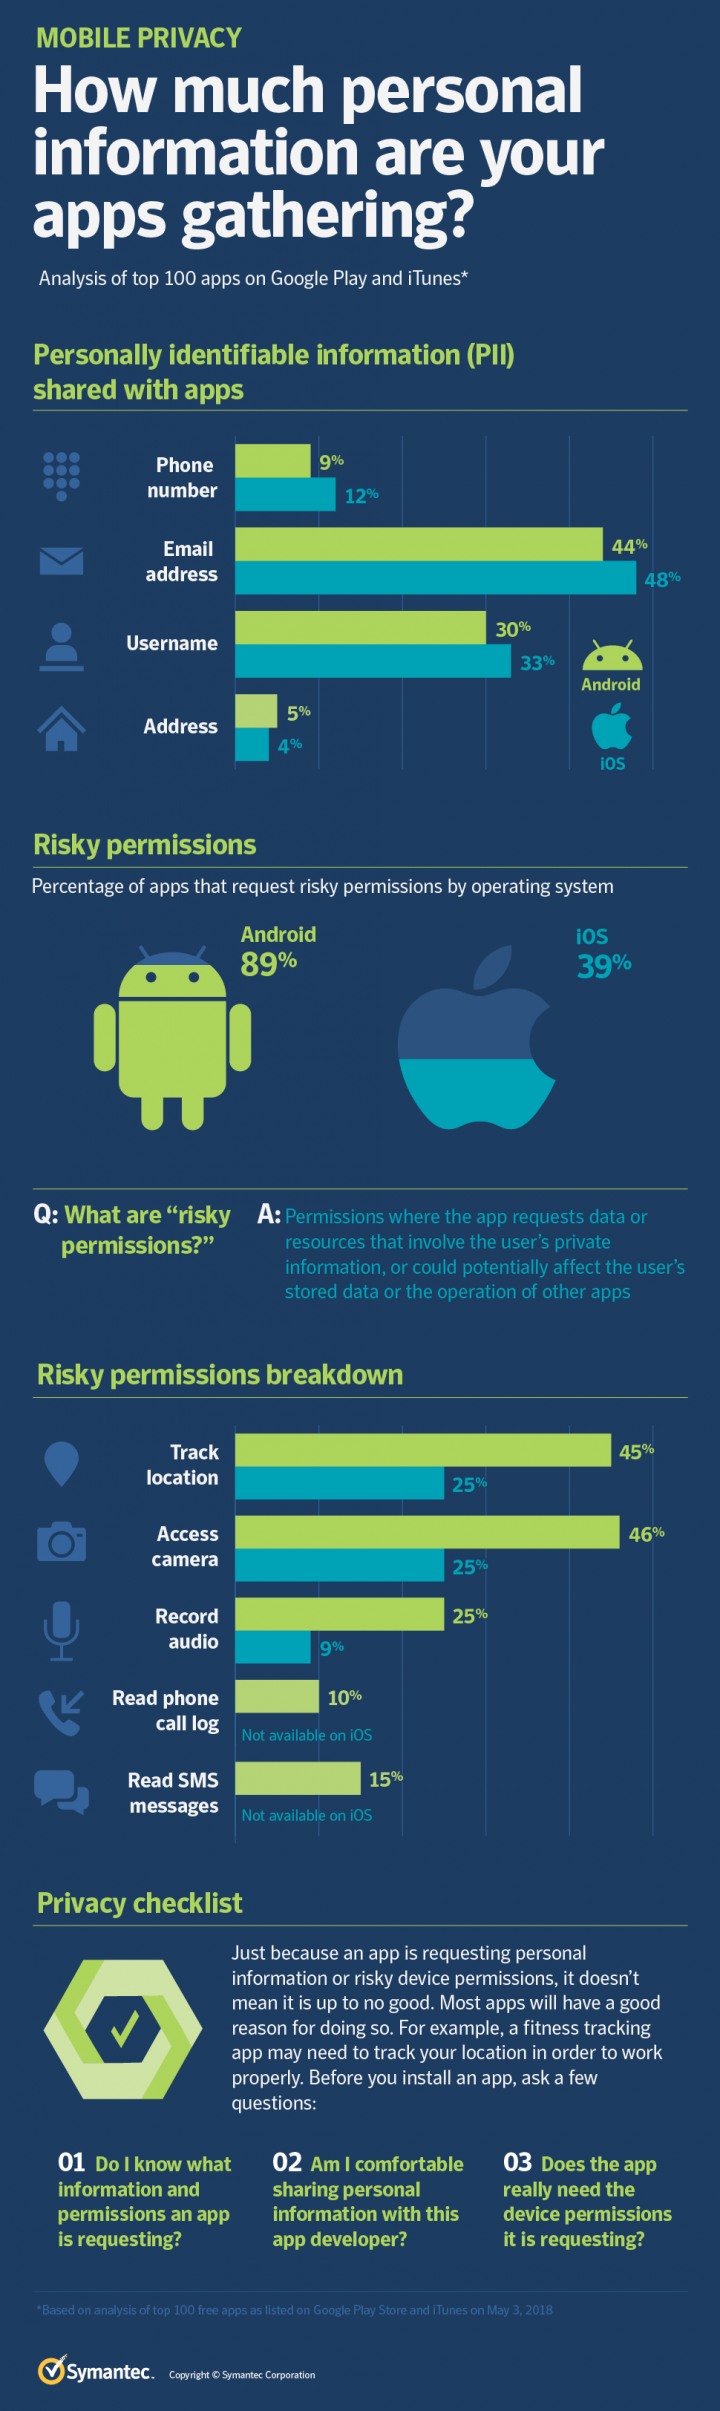 Mobile Privacy What Do Your Apps Know About You Symantec Blogs